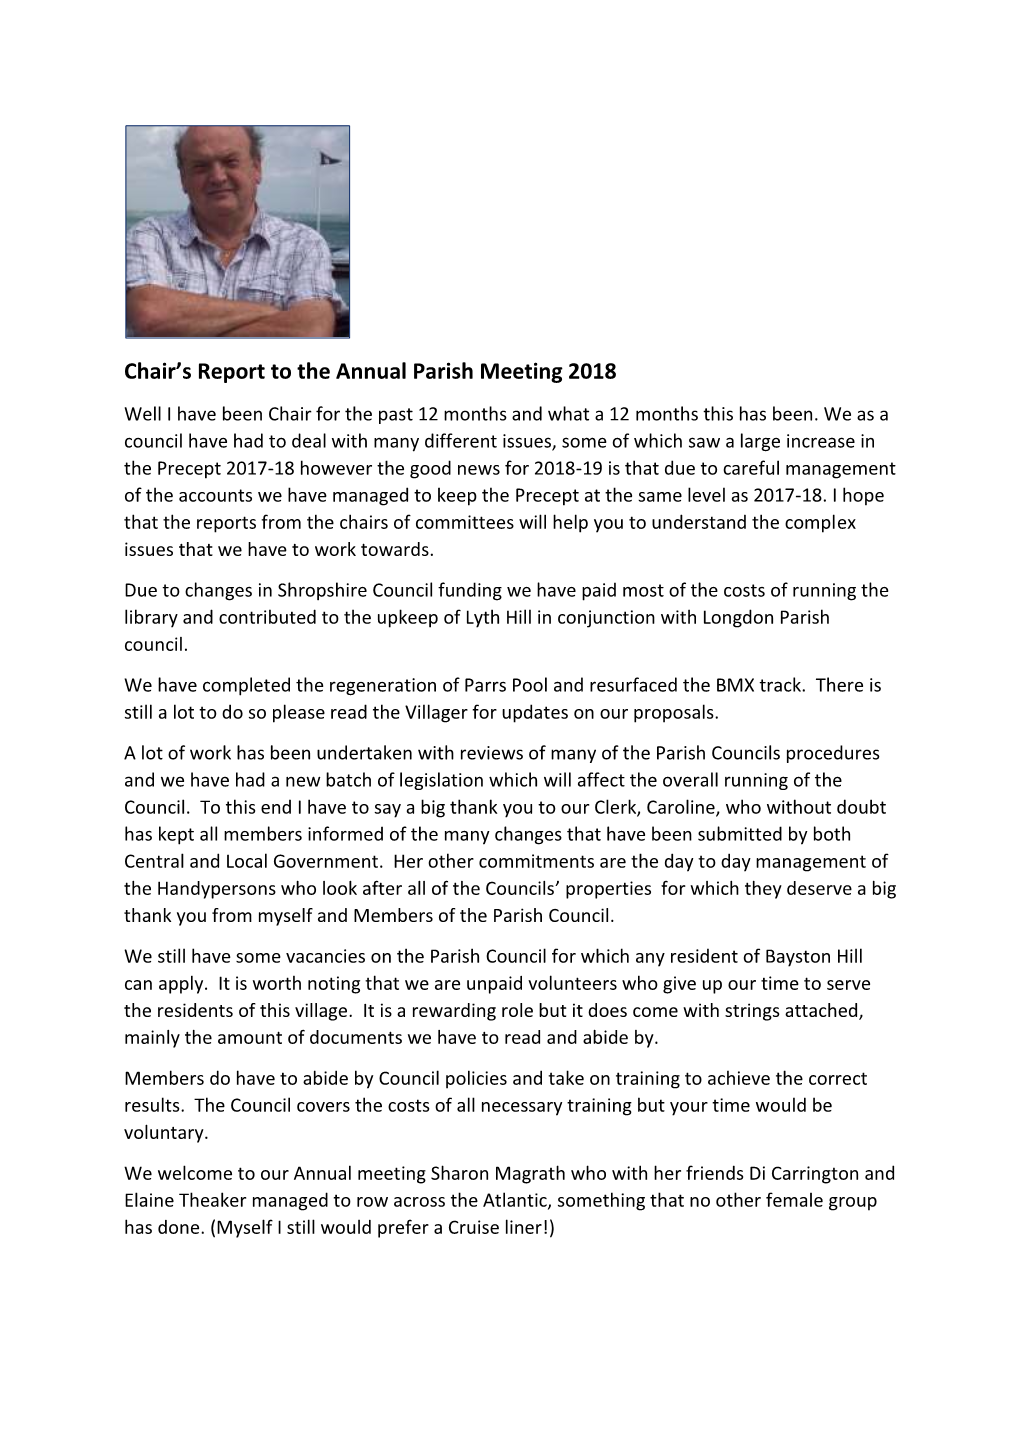 Chair's Report to the Annual Parish Meeting 2018